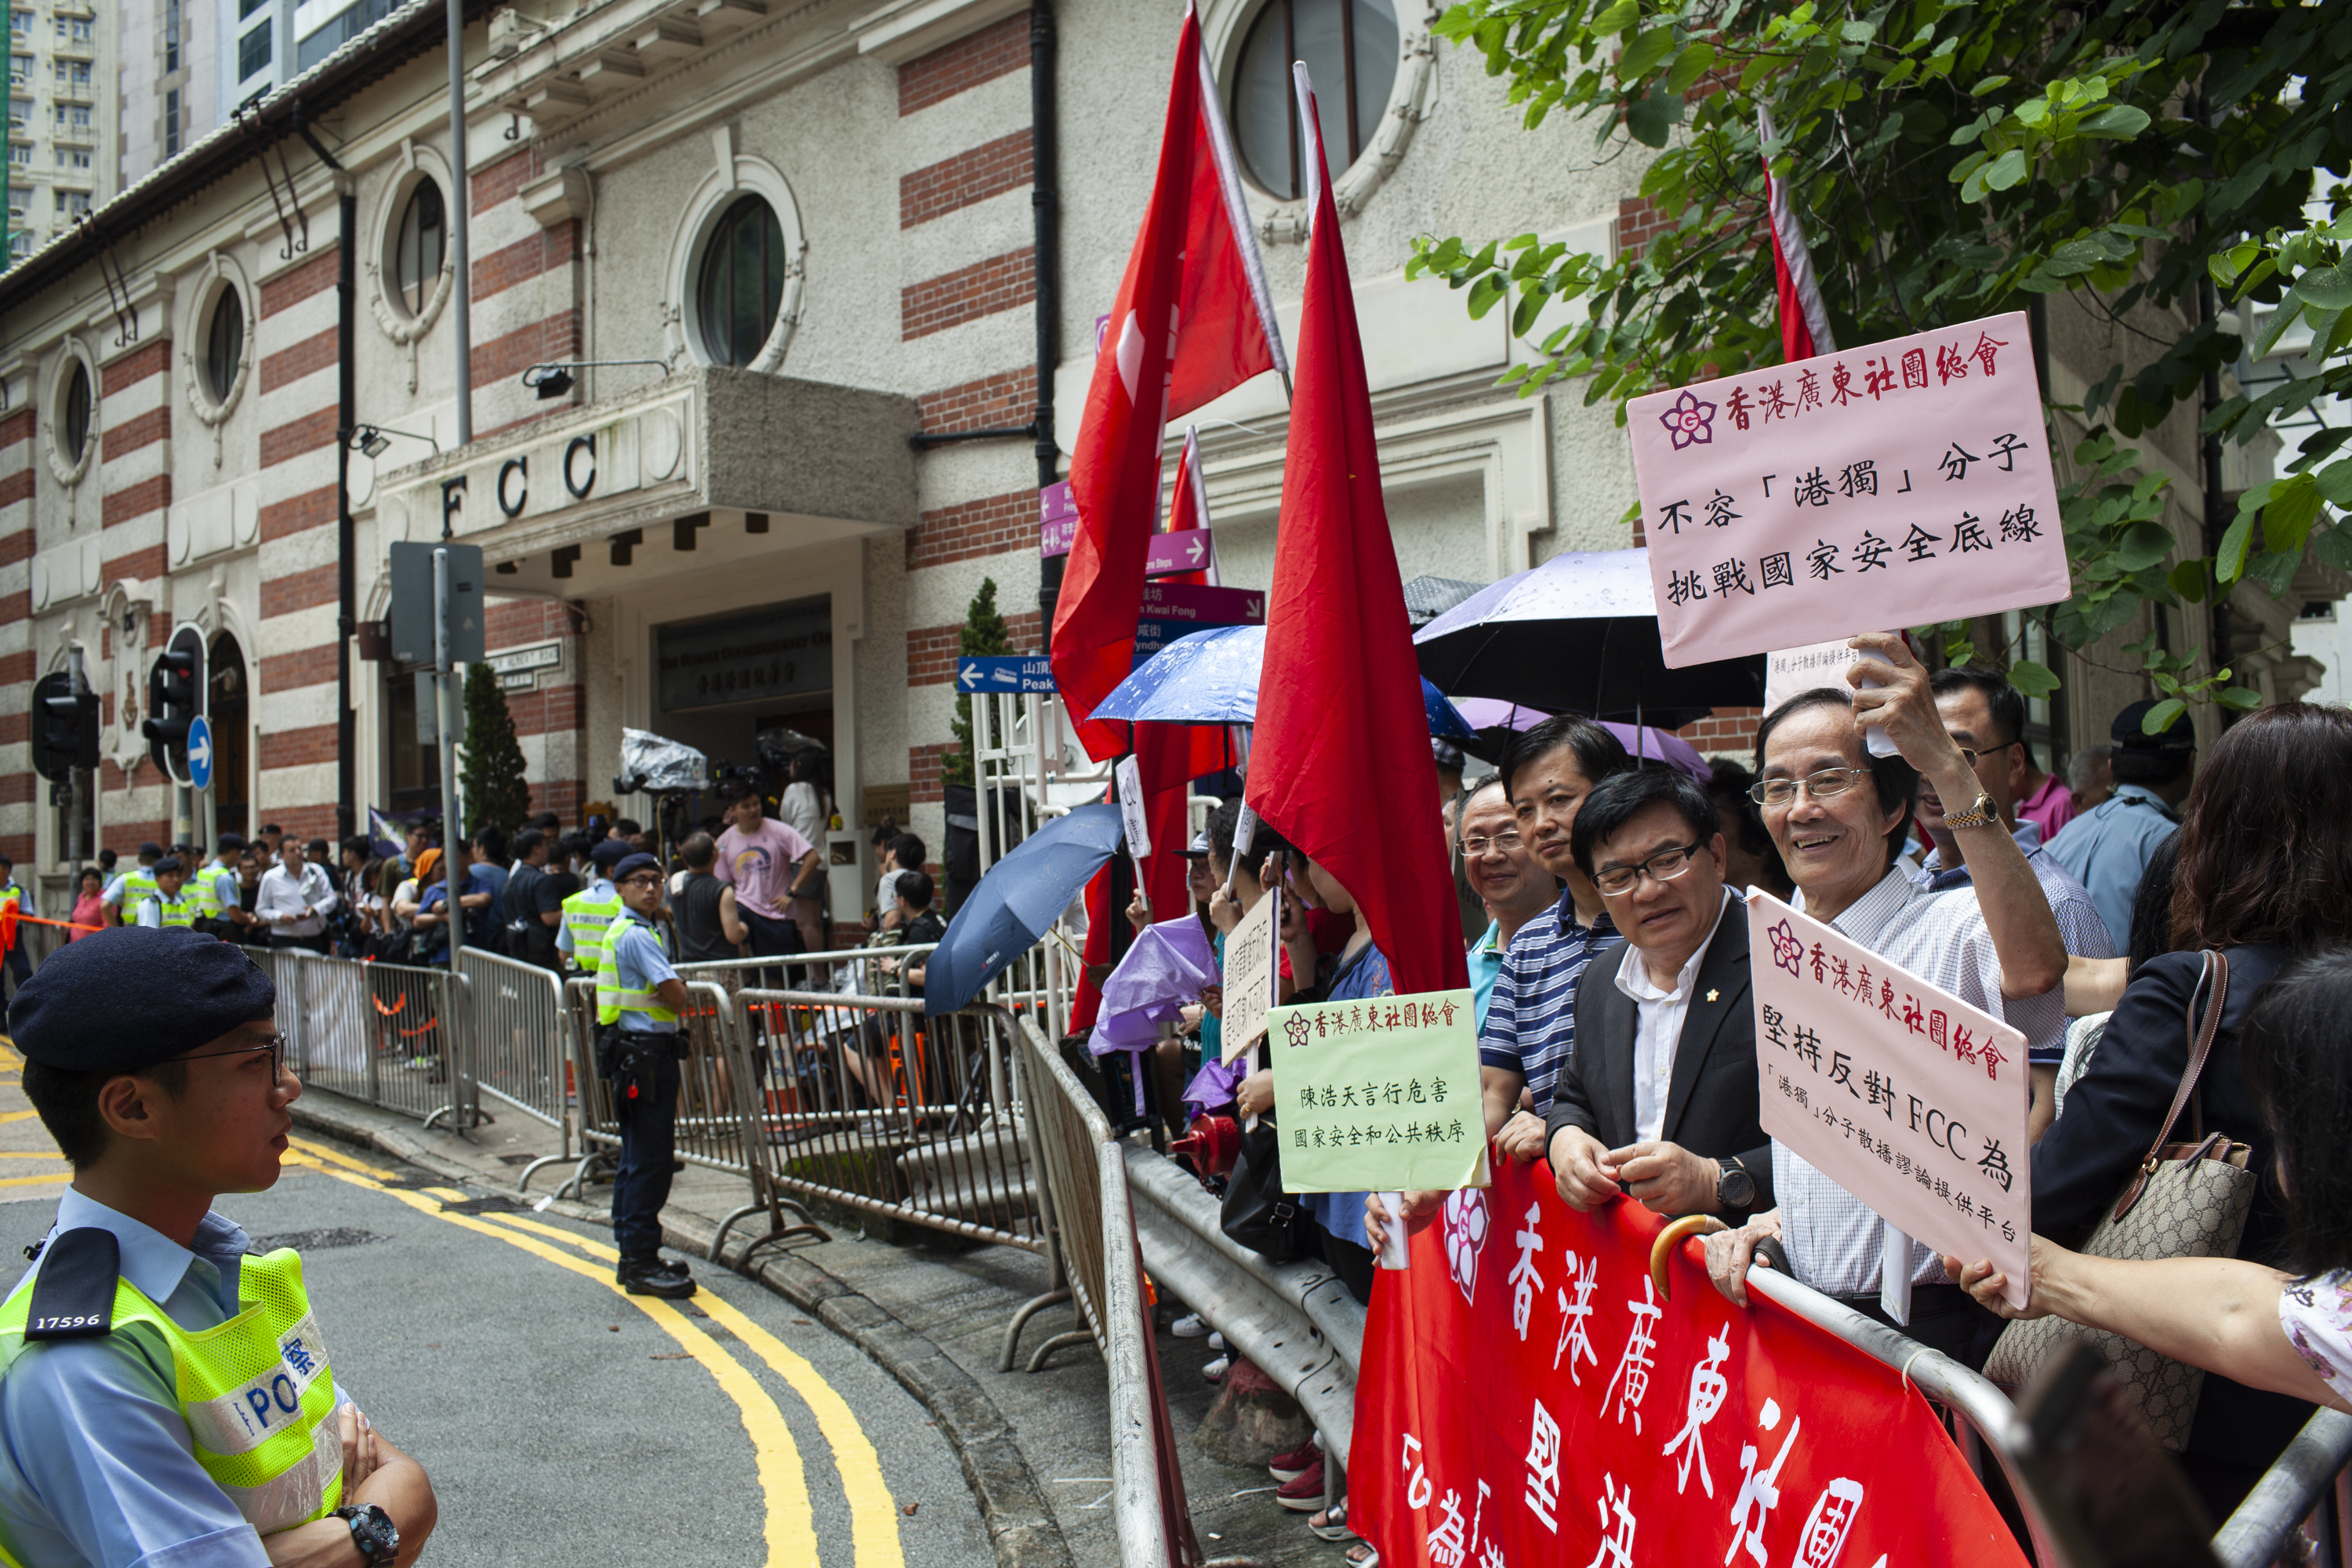 Pro-China demonstrators hold signs outside the Foreign Correspondents Club in Hong Kong on Aug. 13, 2018. (Viola Gaskell—SOPA Images/LightRocket/Getty Images)